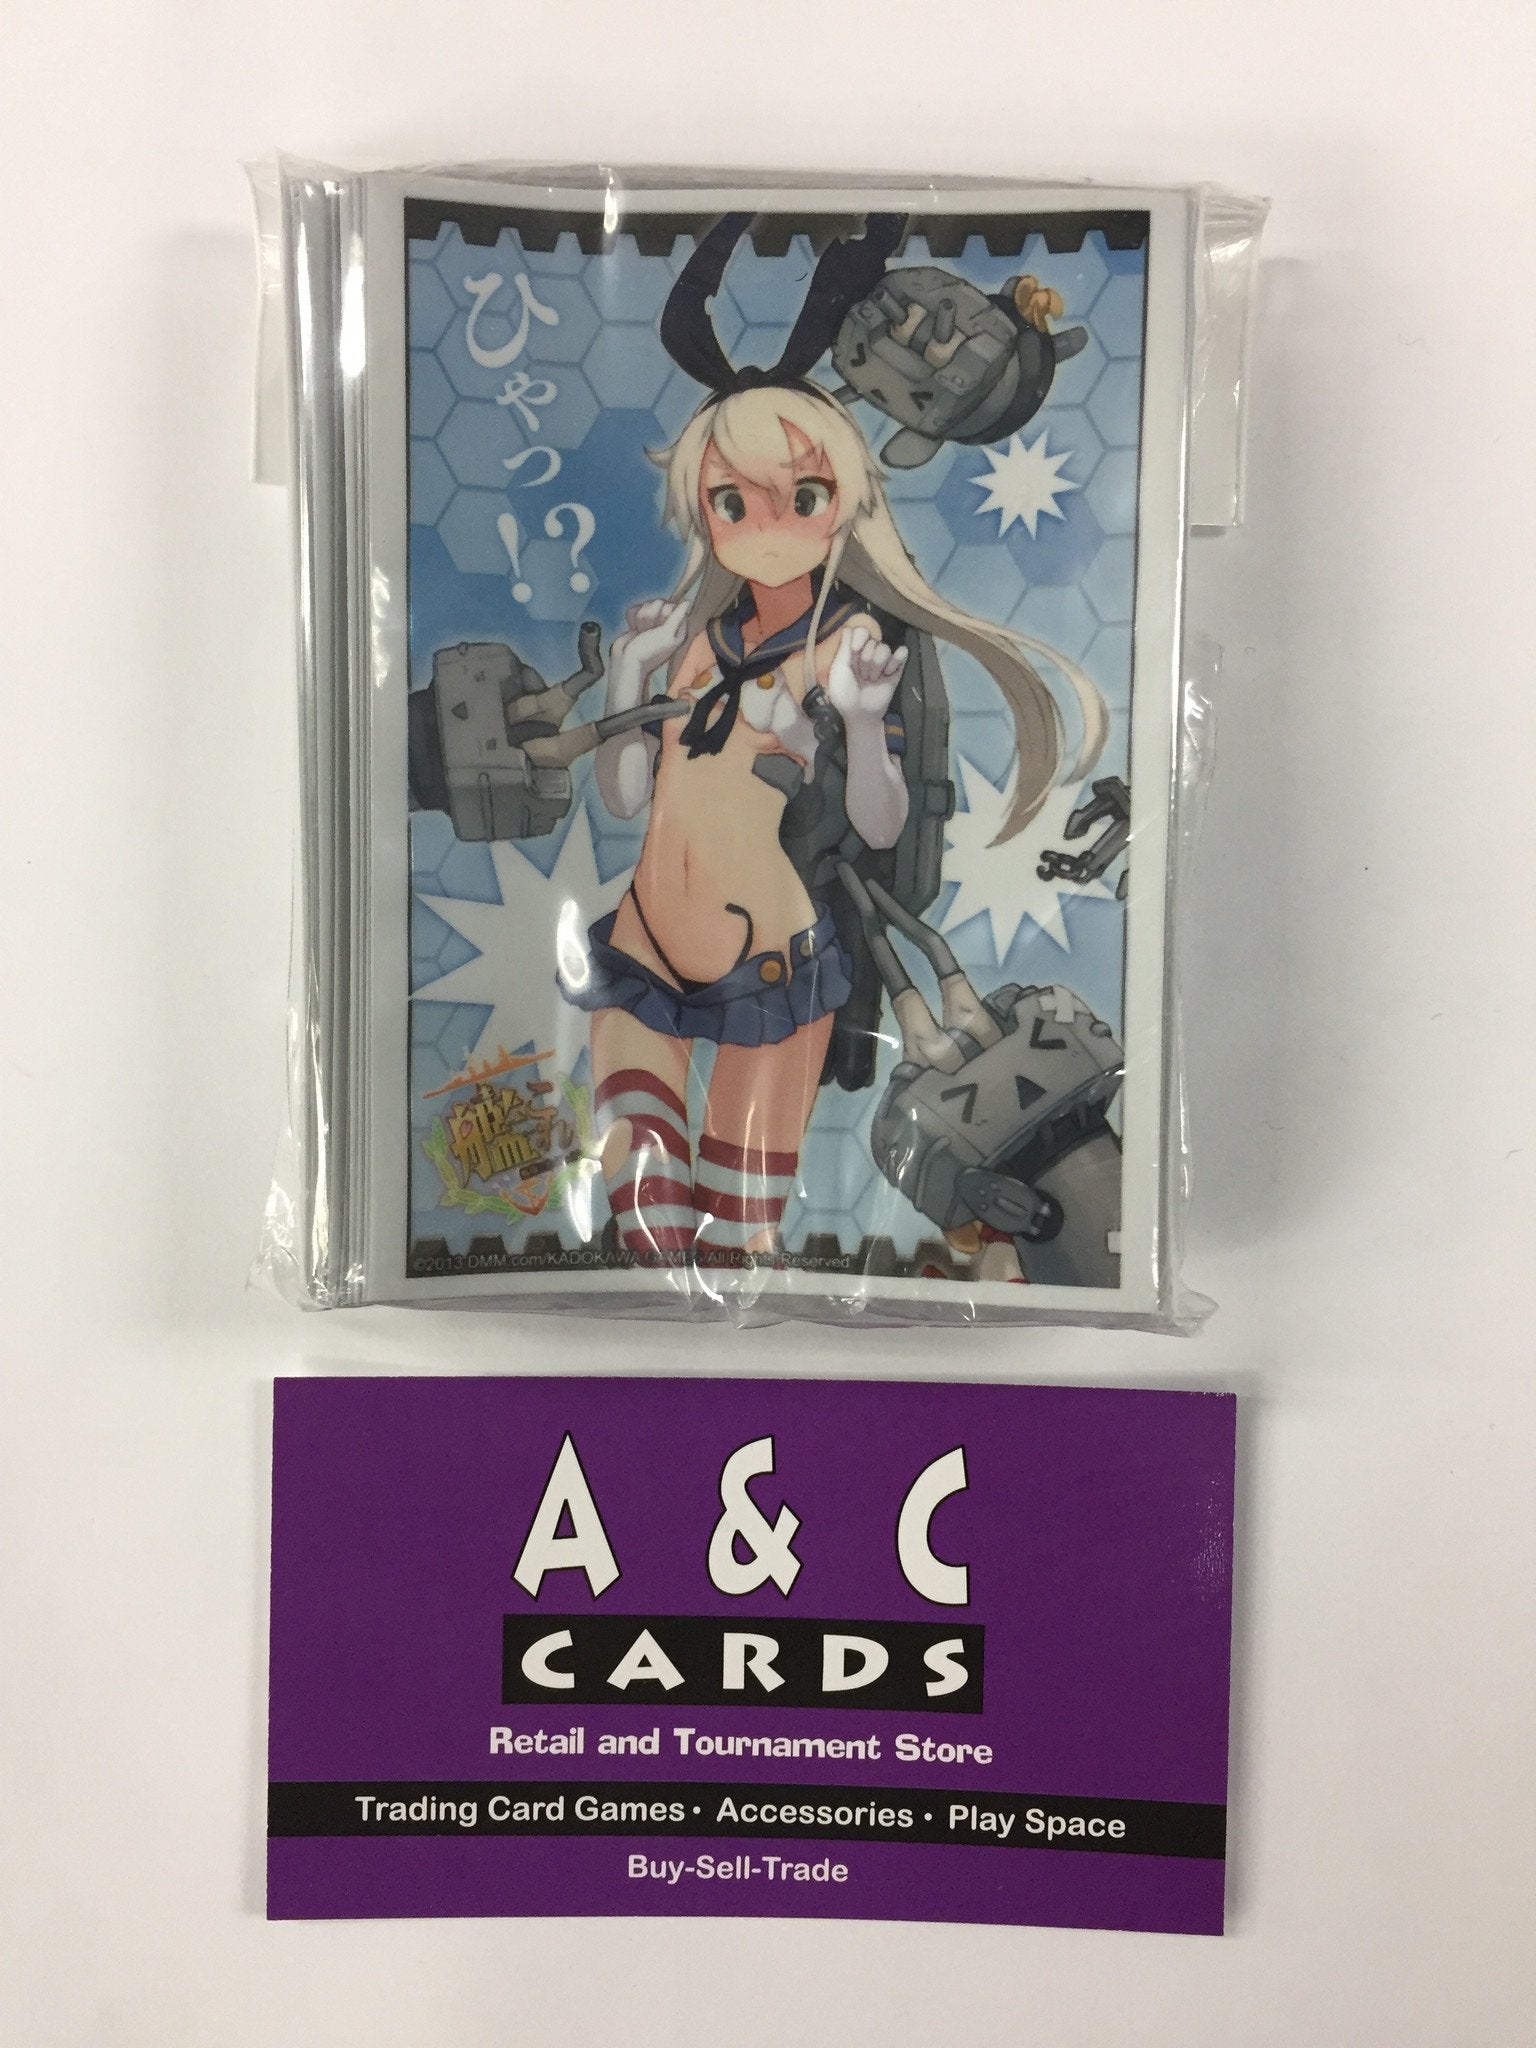 Character Sleeves "Shimakaze" #9 - 1 pack of Standard Size Sleeves - Kantai Collection